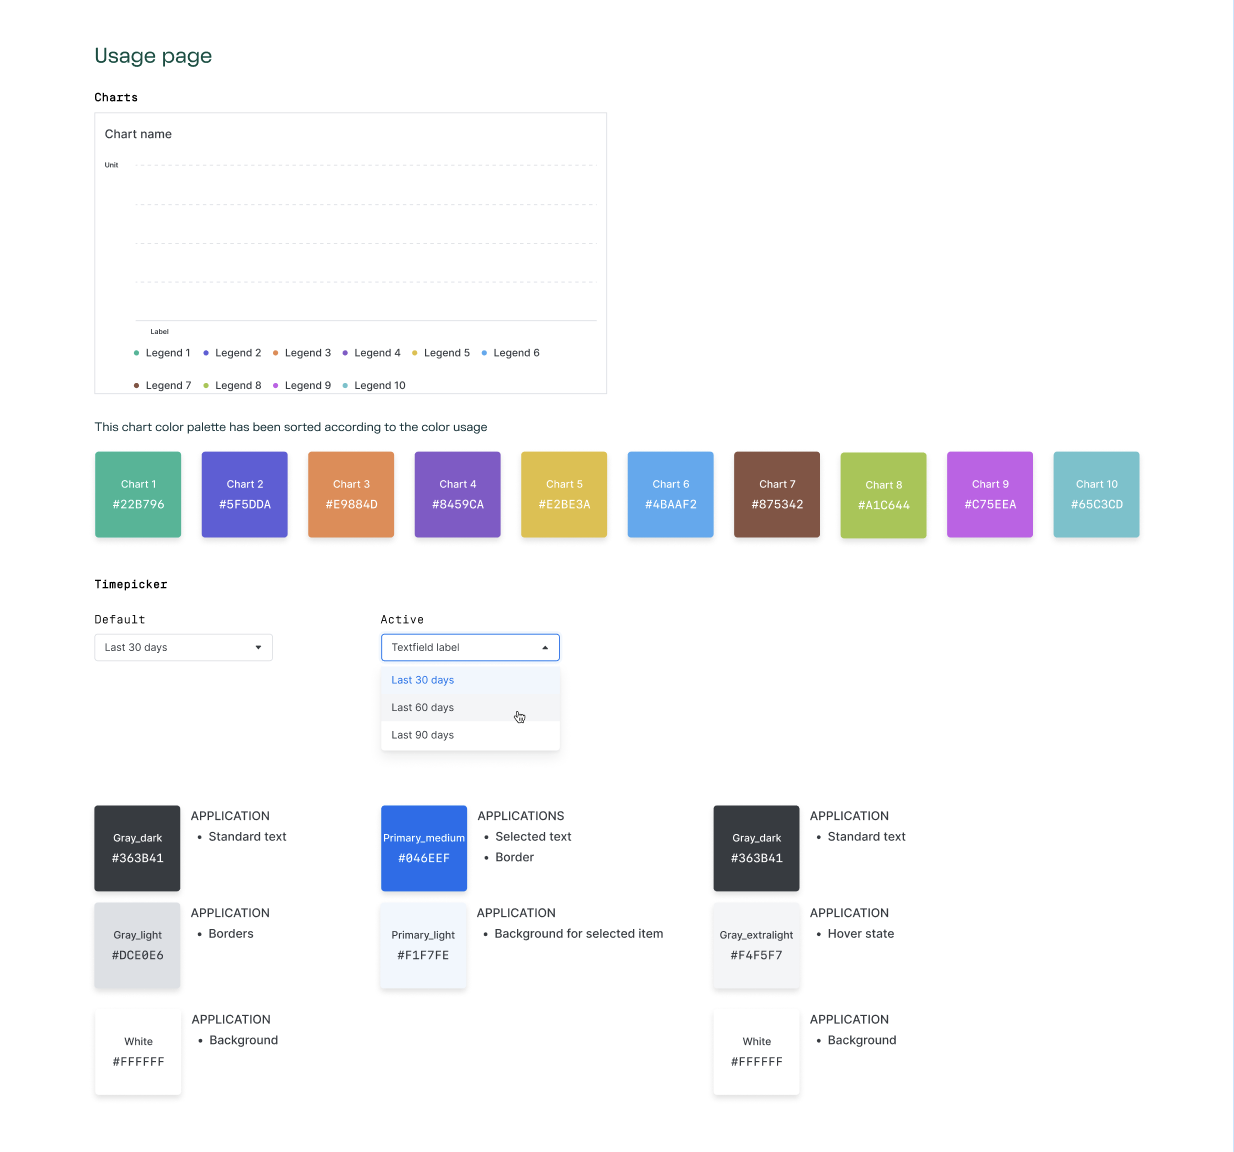 dashboard style guide for usage dashboard